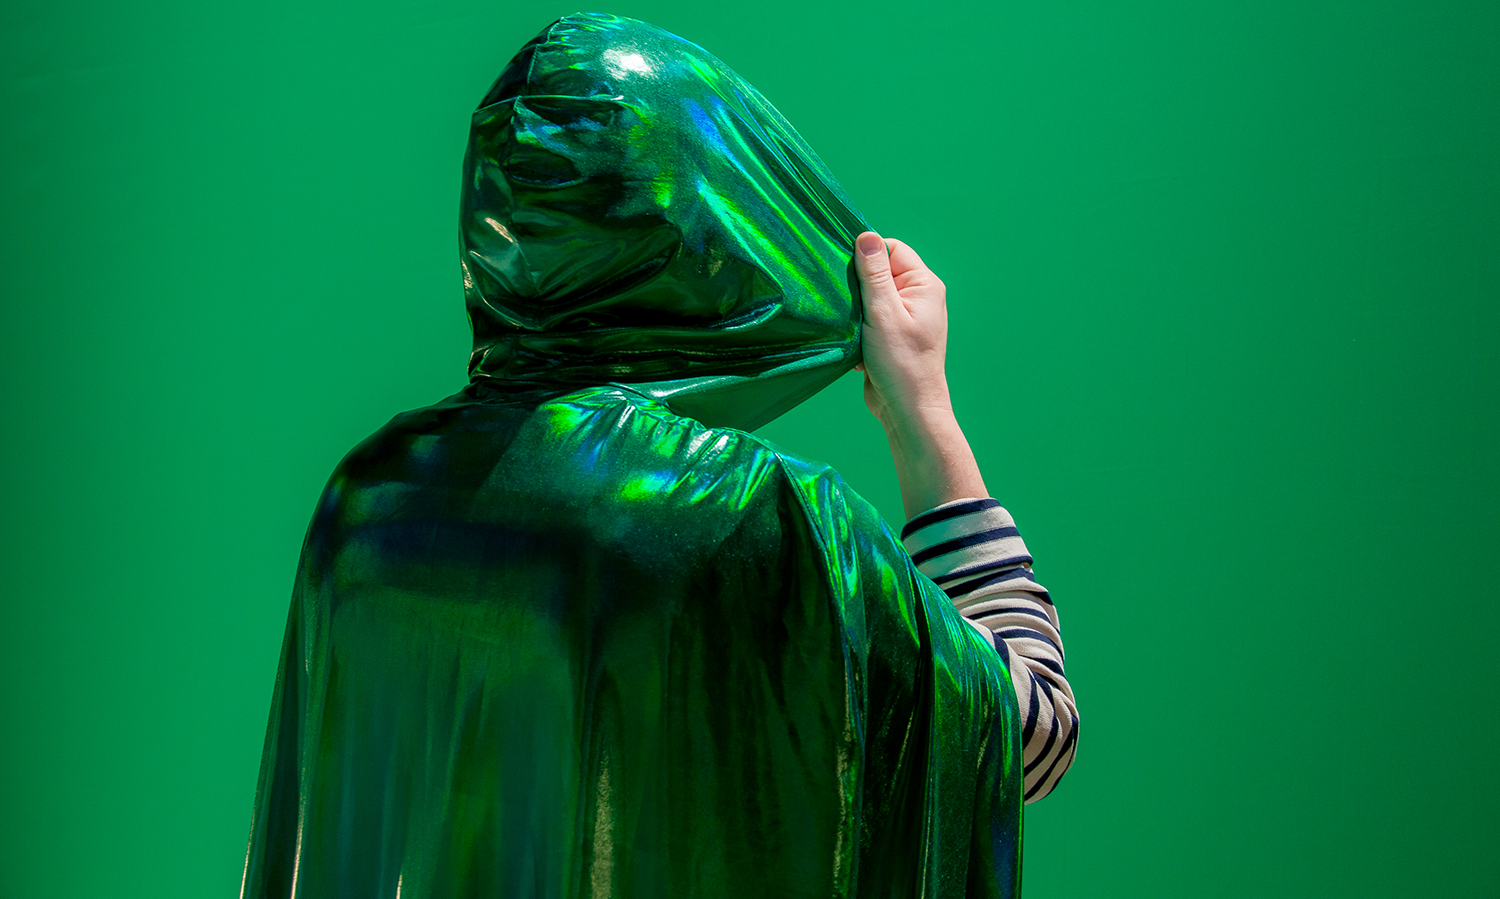 a hooded figure in green against a green background